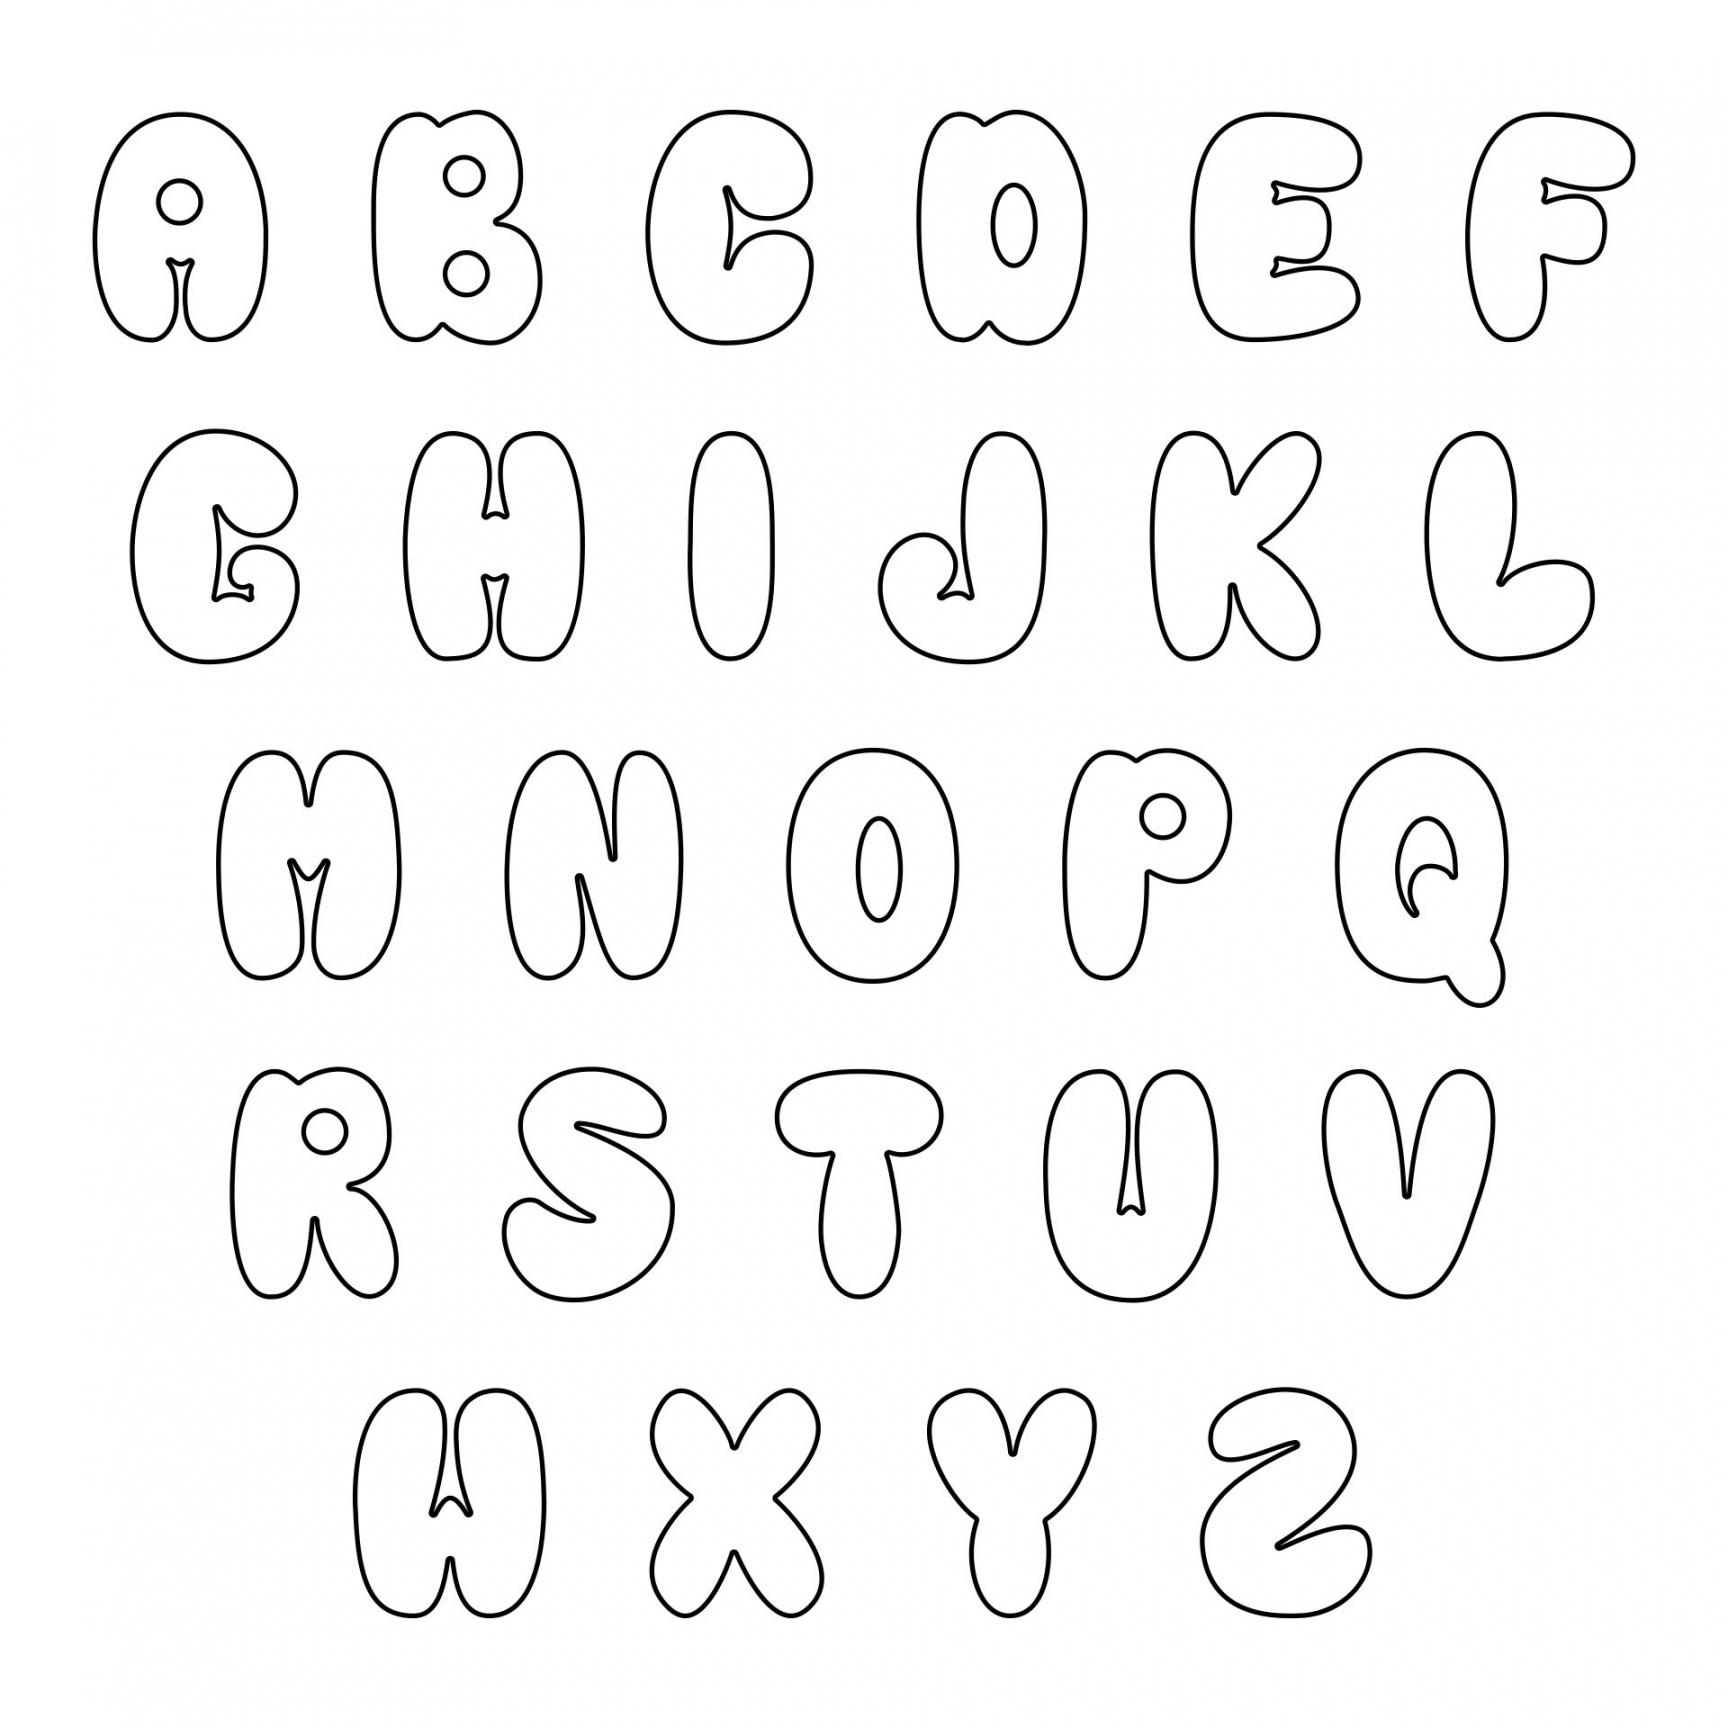 Bubble Letters Printable Free - Printable -  Best Printable Bubble Letters A-Z - printablee